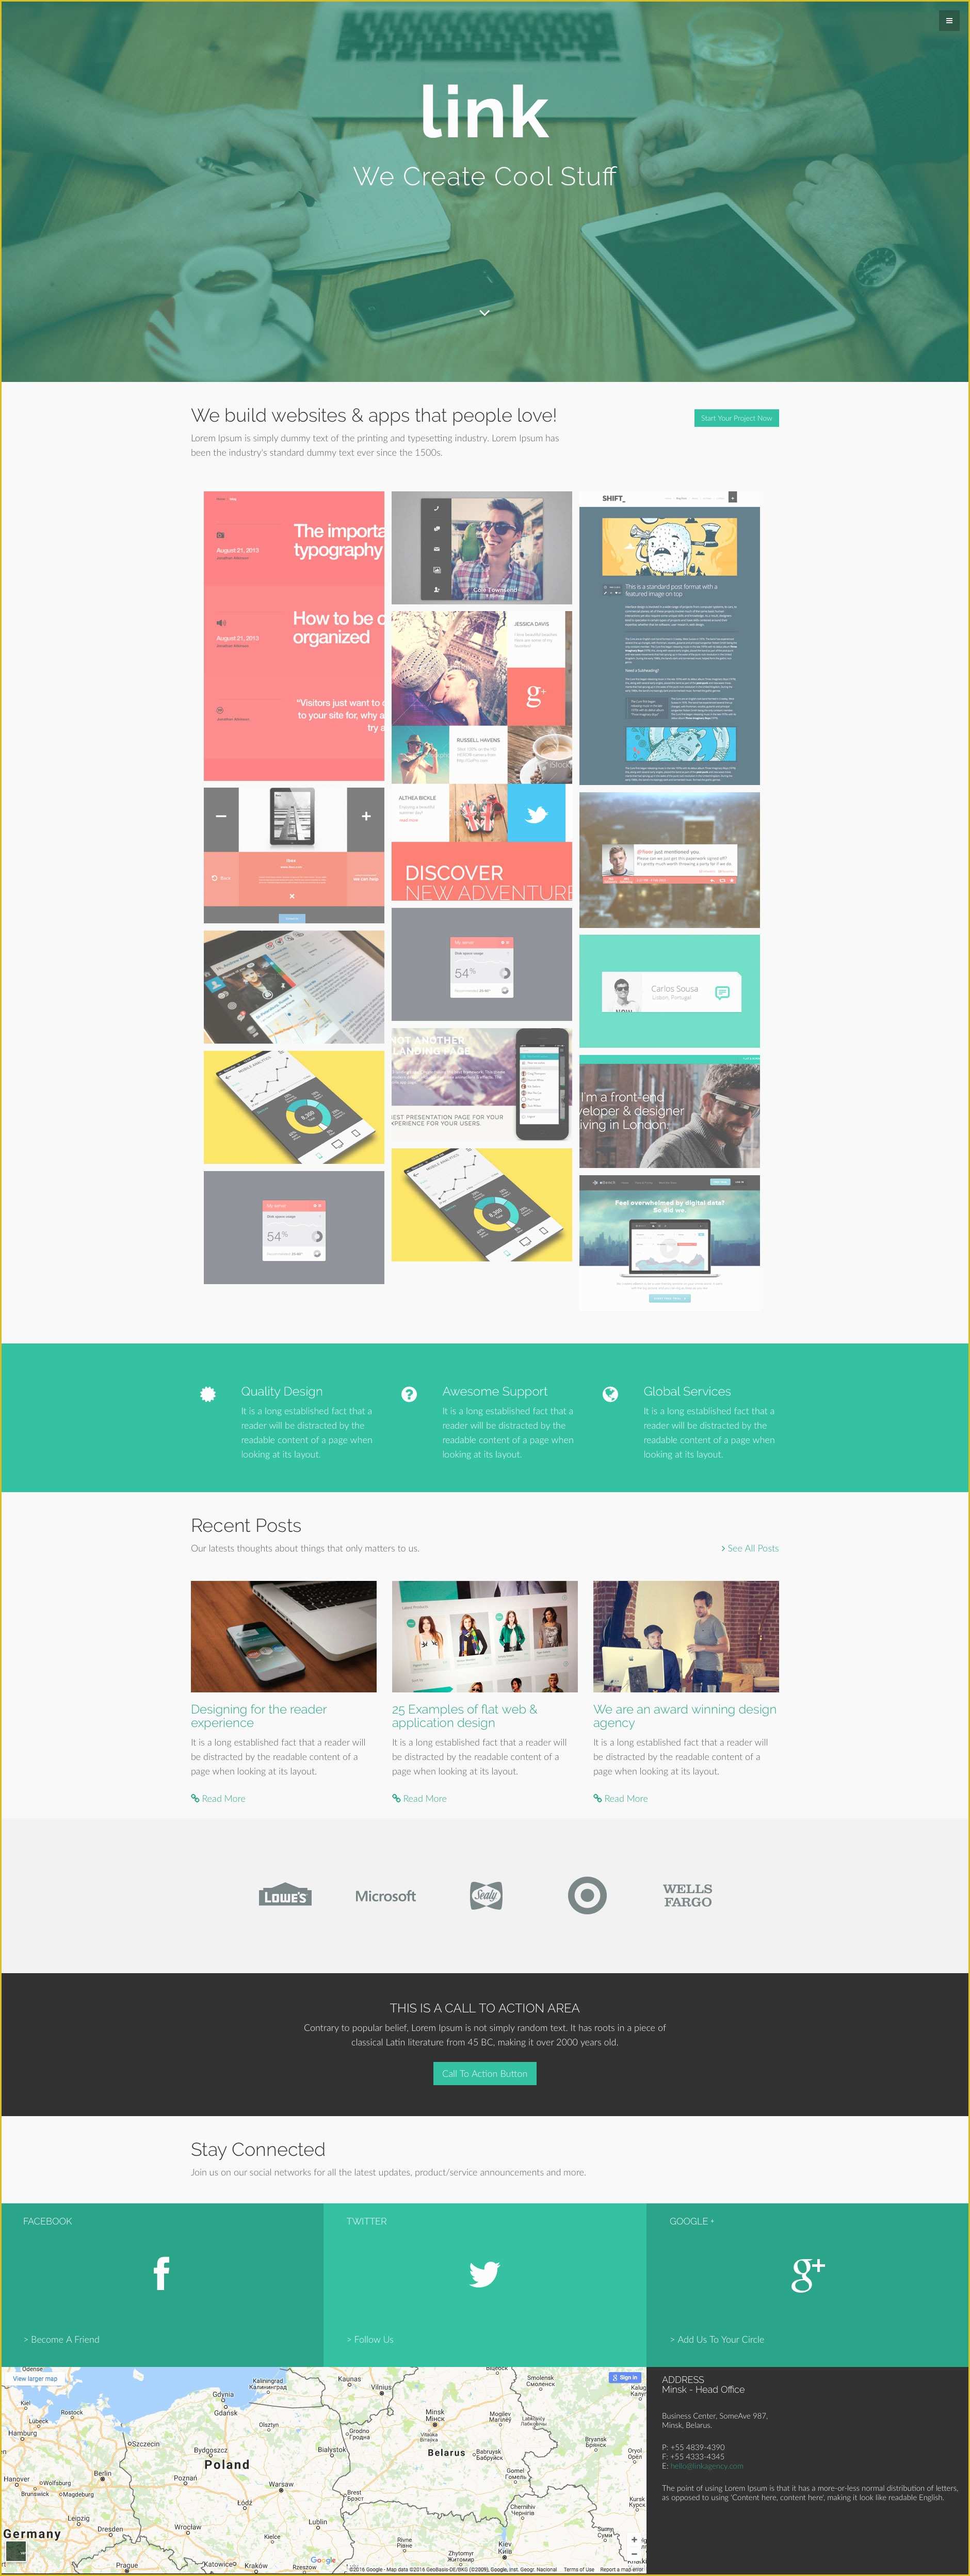 Bootstrap Responsive Templates Free Download Of Link Free Responsive HTML5 Bootstrap Template